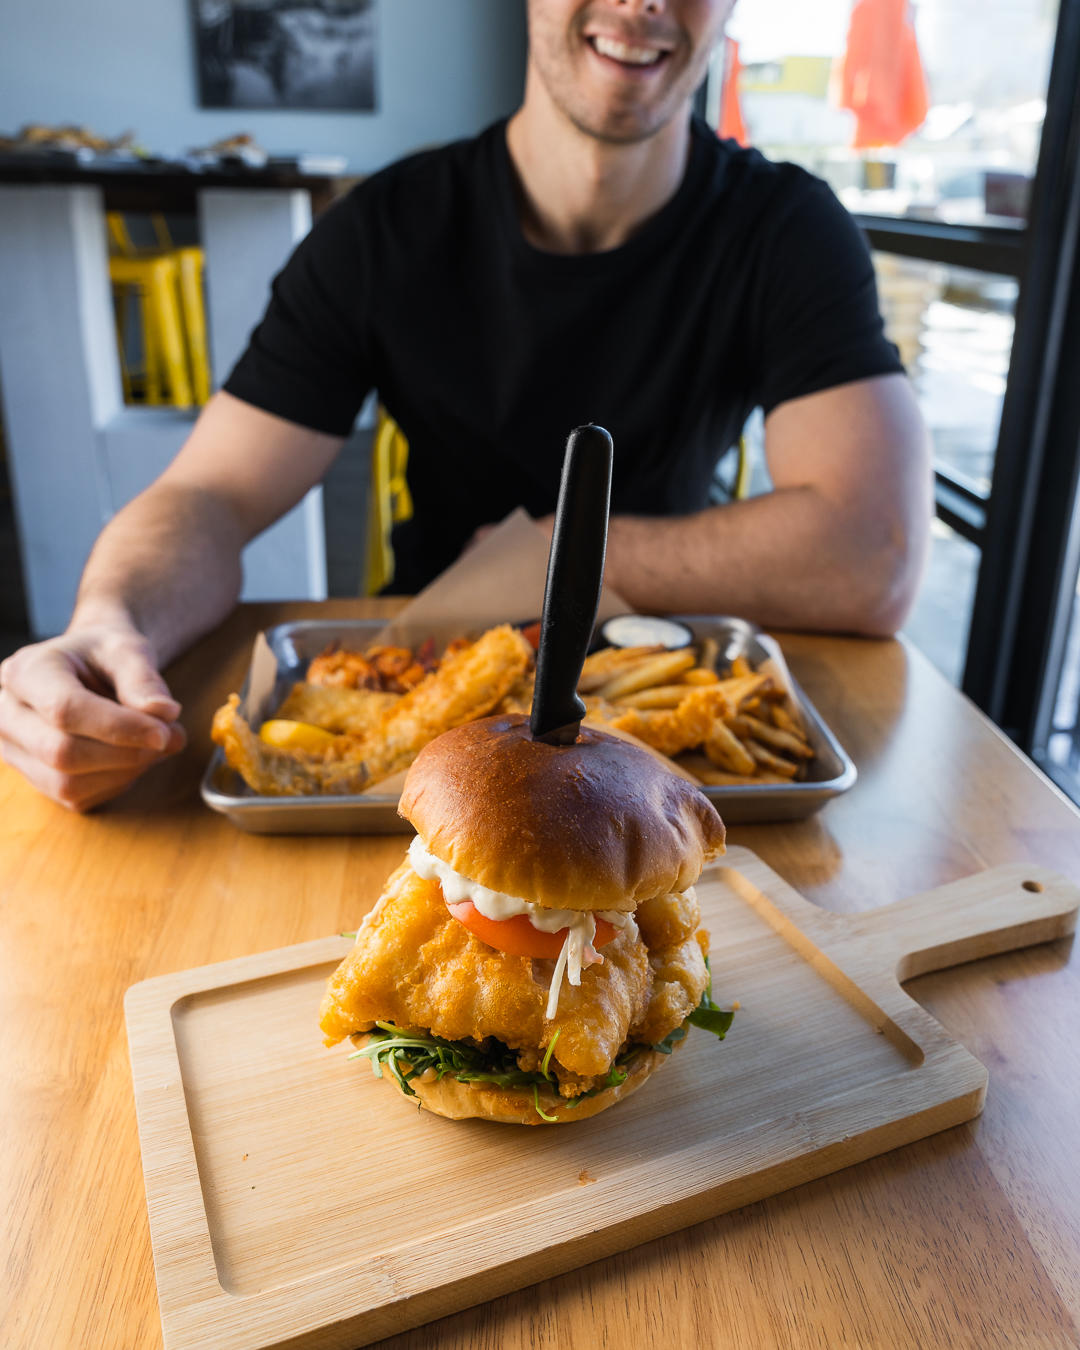 OUR LEGENDARY FISH SANDWICH - Joey's Famous Fish, lime slaw, tomato, mixed greens, chipotle aioli an Joey's Fish Shack Medicine Hat (403)487-4883